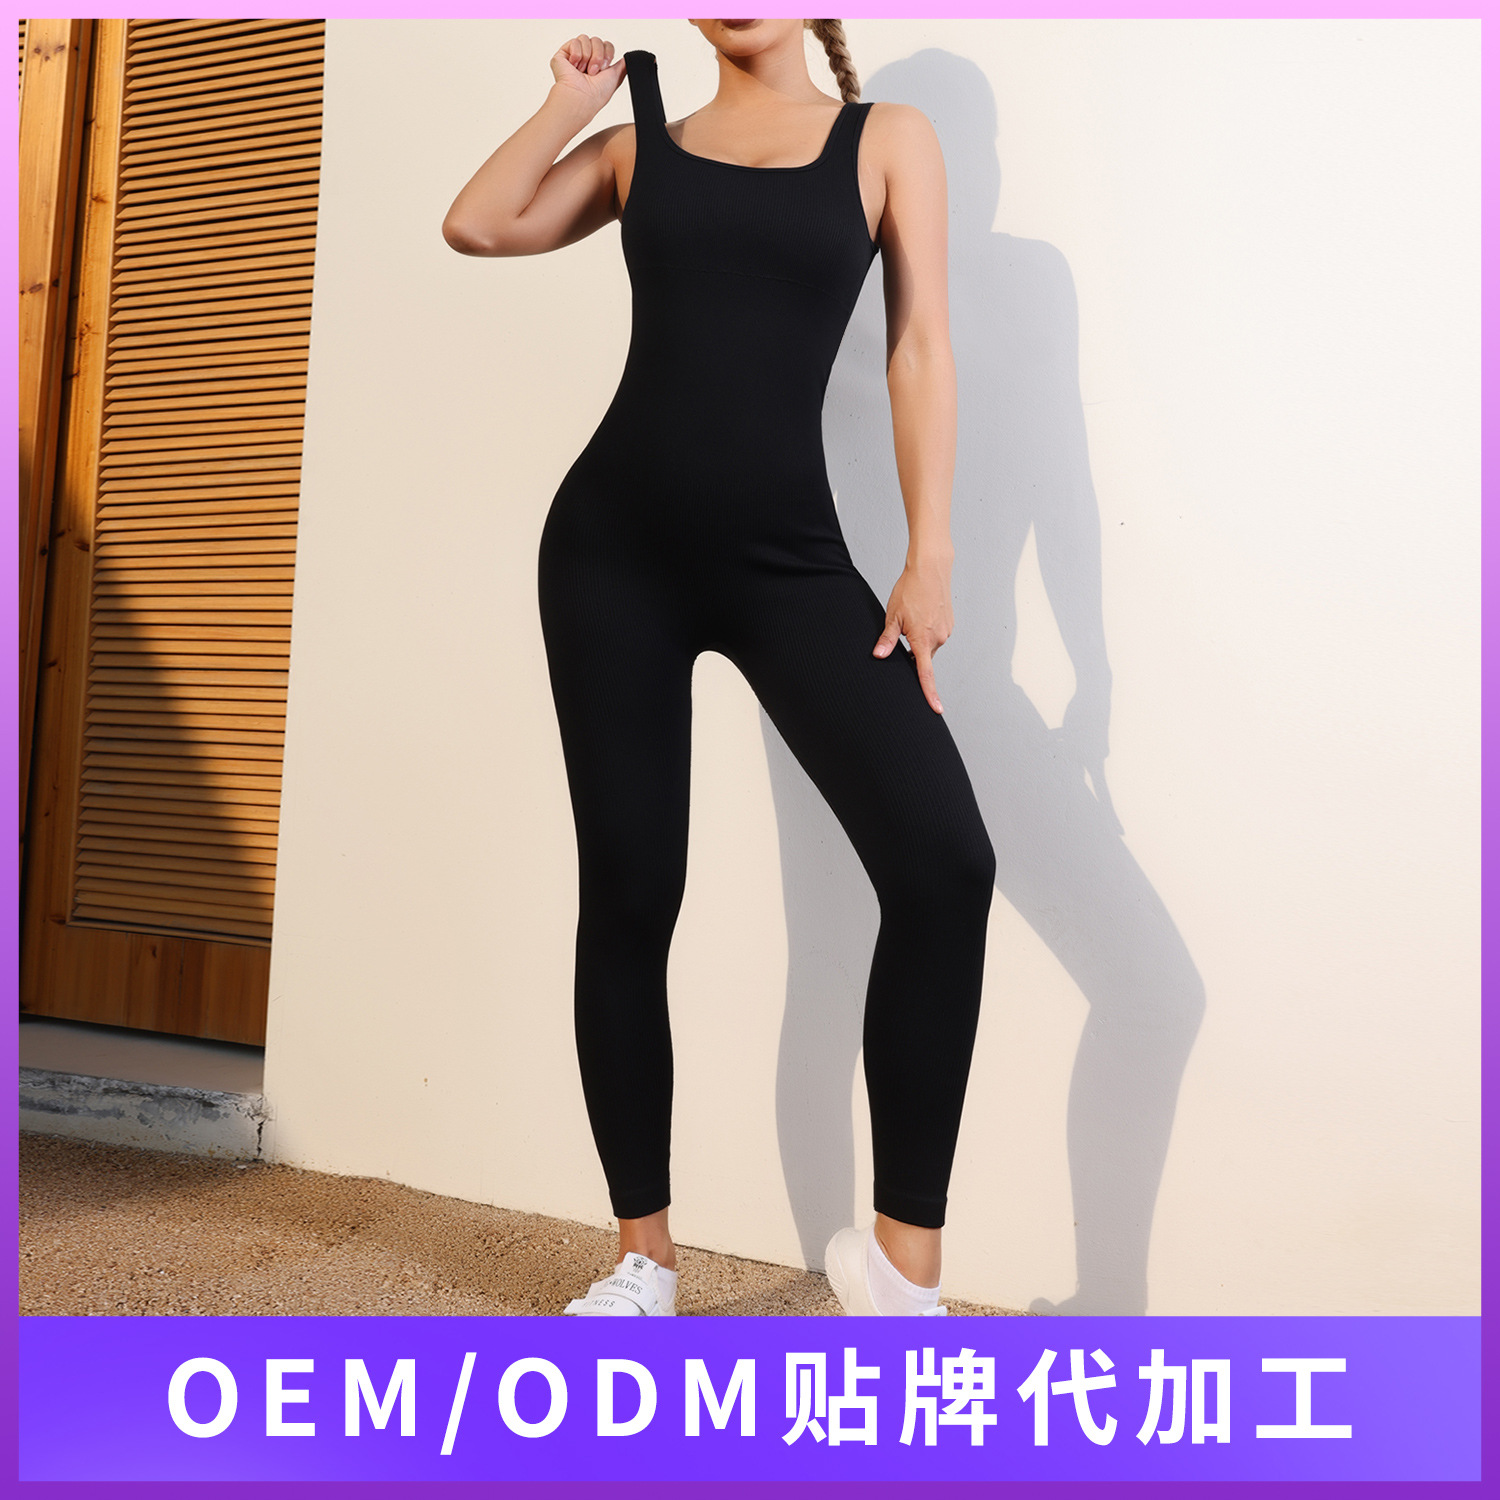 Processing Customized European and American Sexy Hip Lifting Yoga Bodysuit Indoor Fitness Exercise Quick-Drying One-Piece Seamless Yoga Clothes